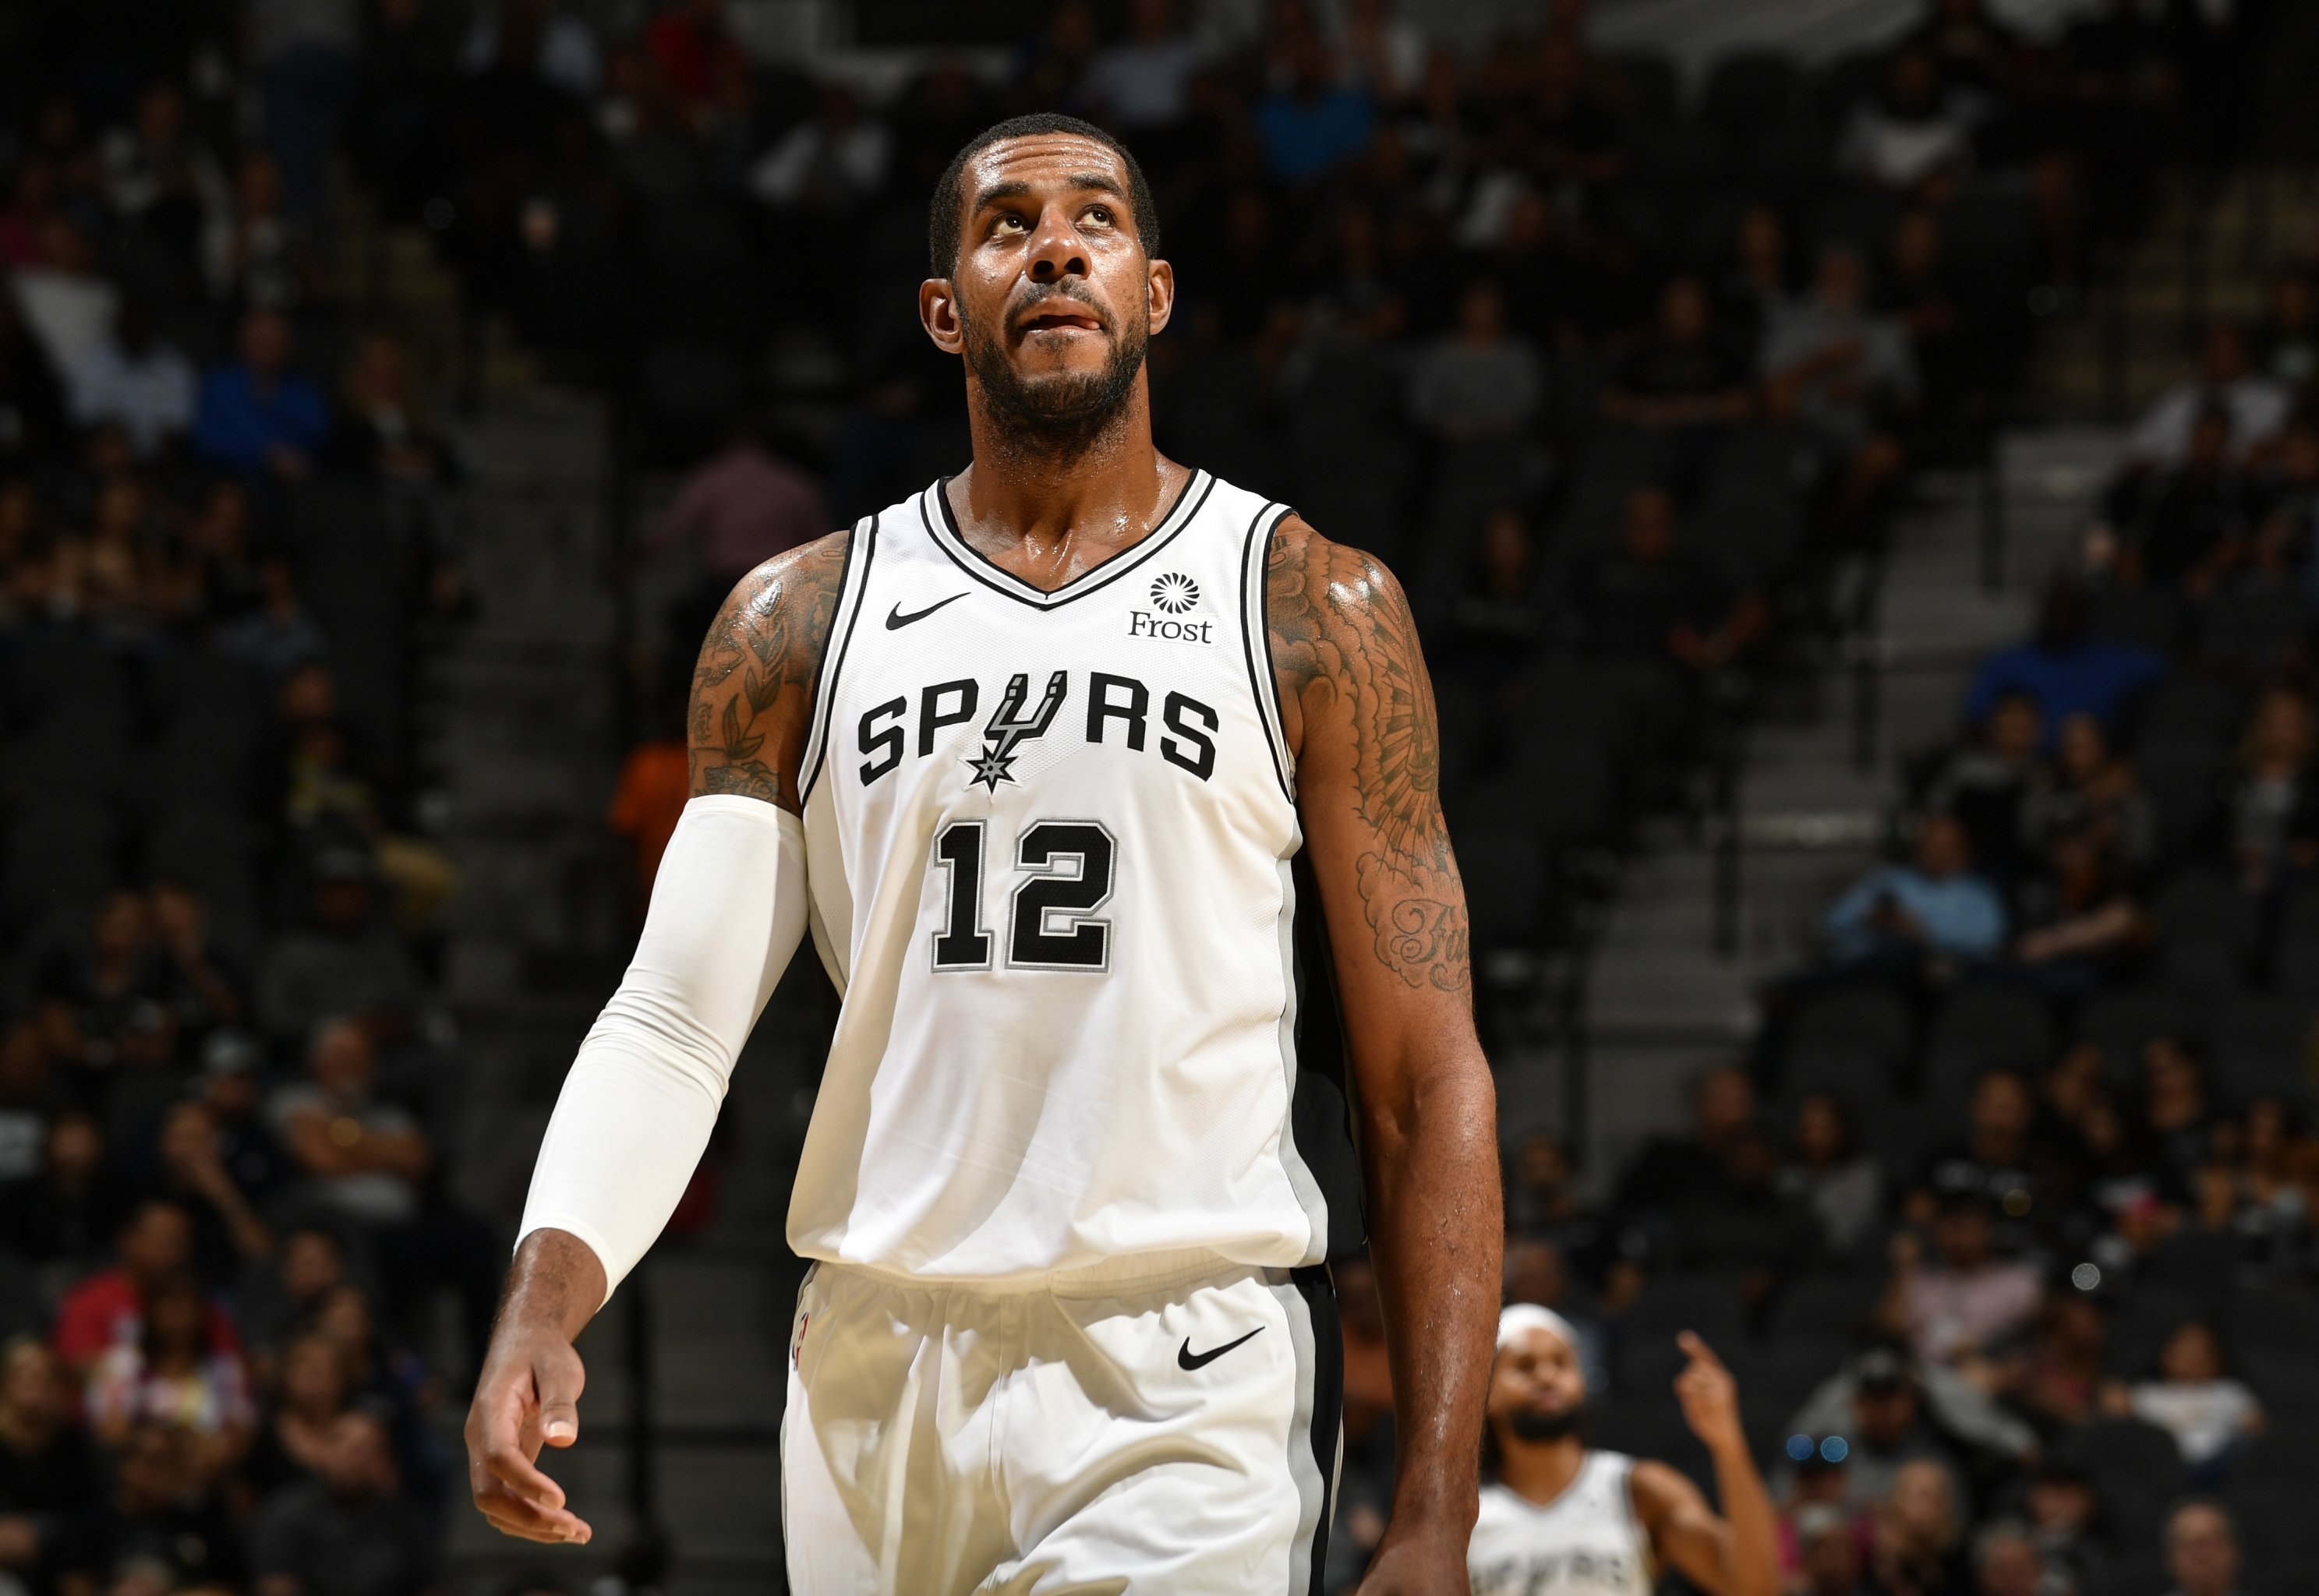 Kawhi Leonard's defensive playmaking is fueling the Spurs offense -  Pounding The Rock